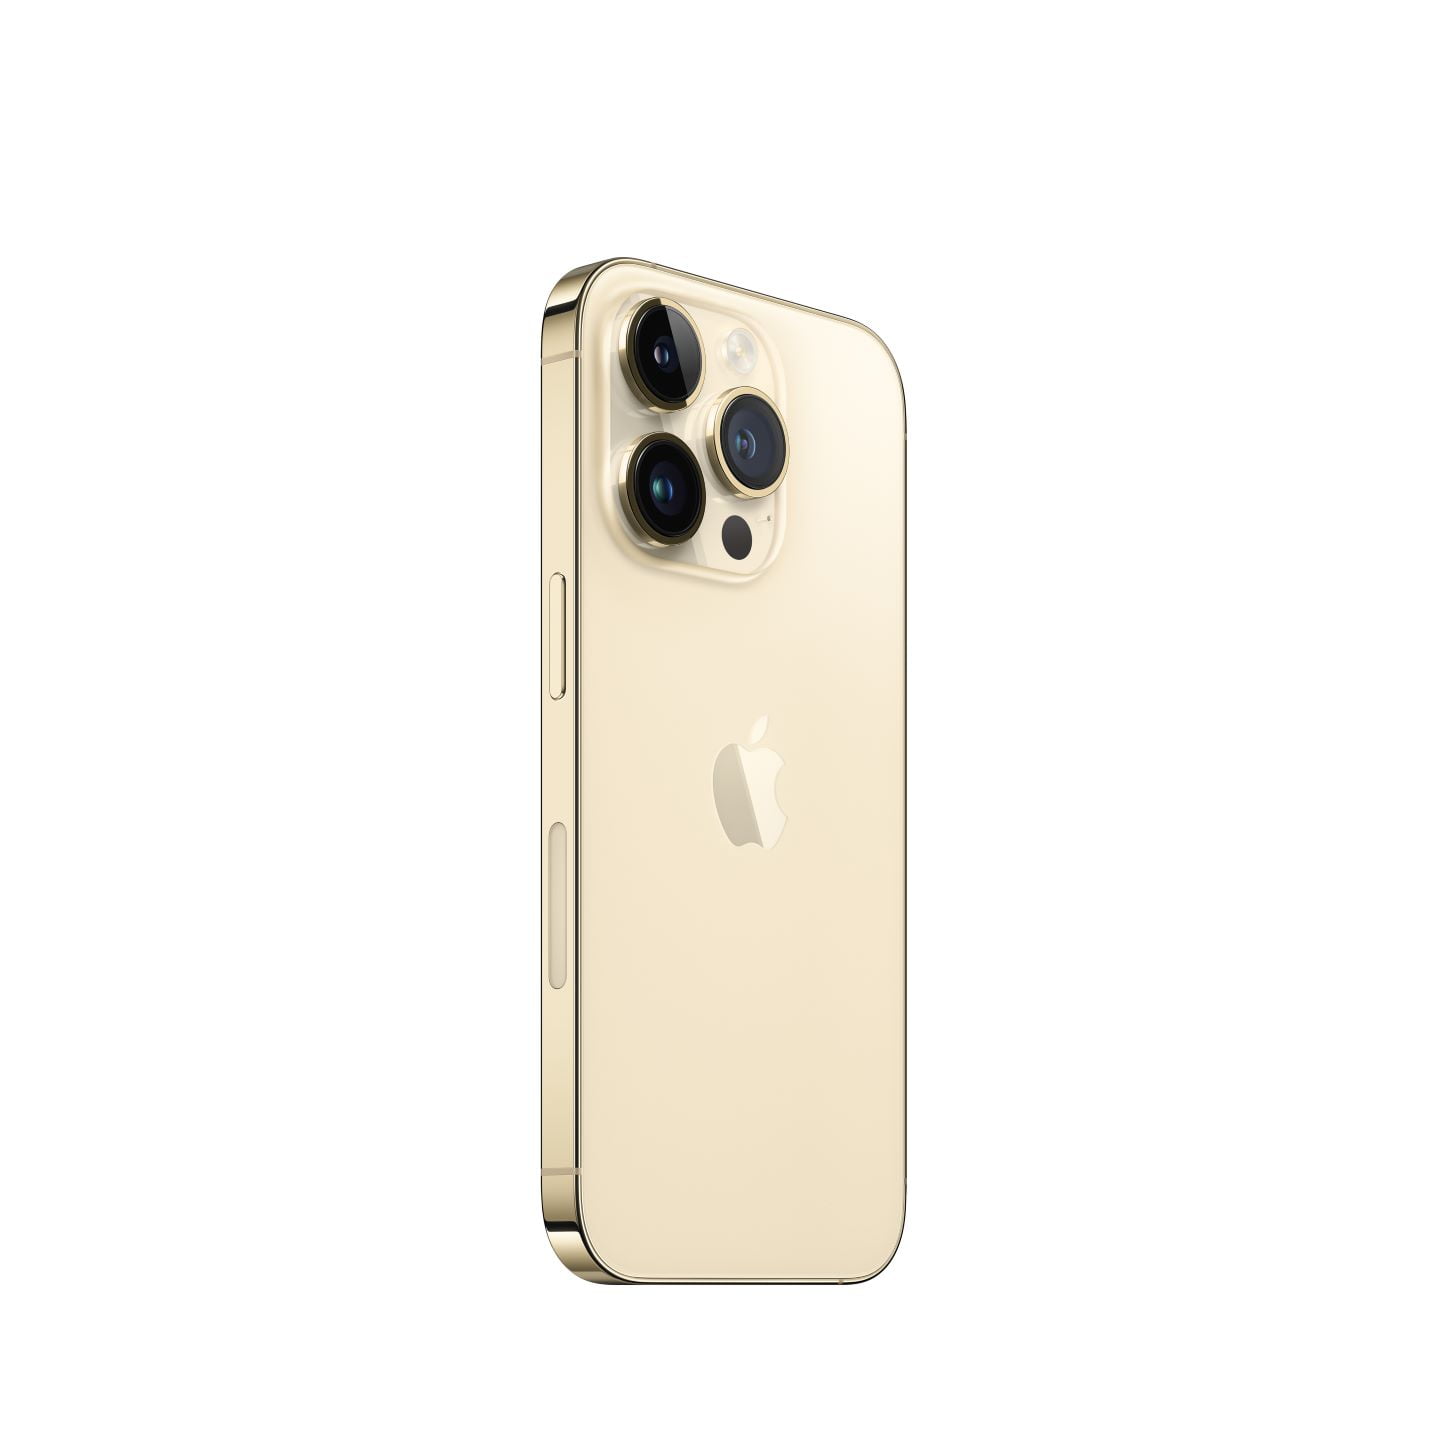 AT&T Apple iPhone 14 Pro 128GB Gold - $400 eGift Card Offer